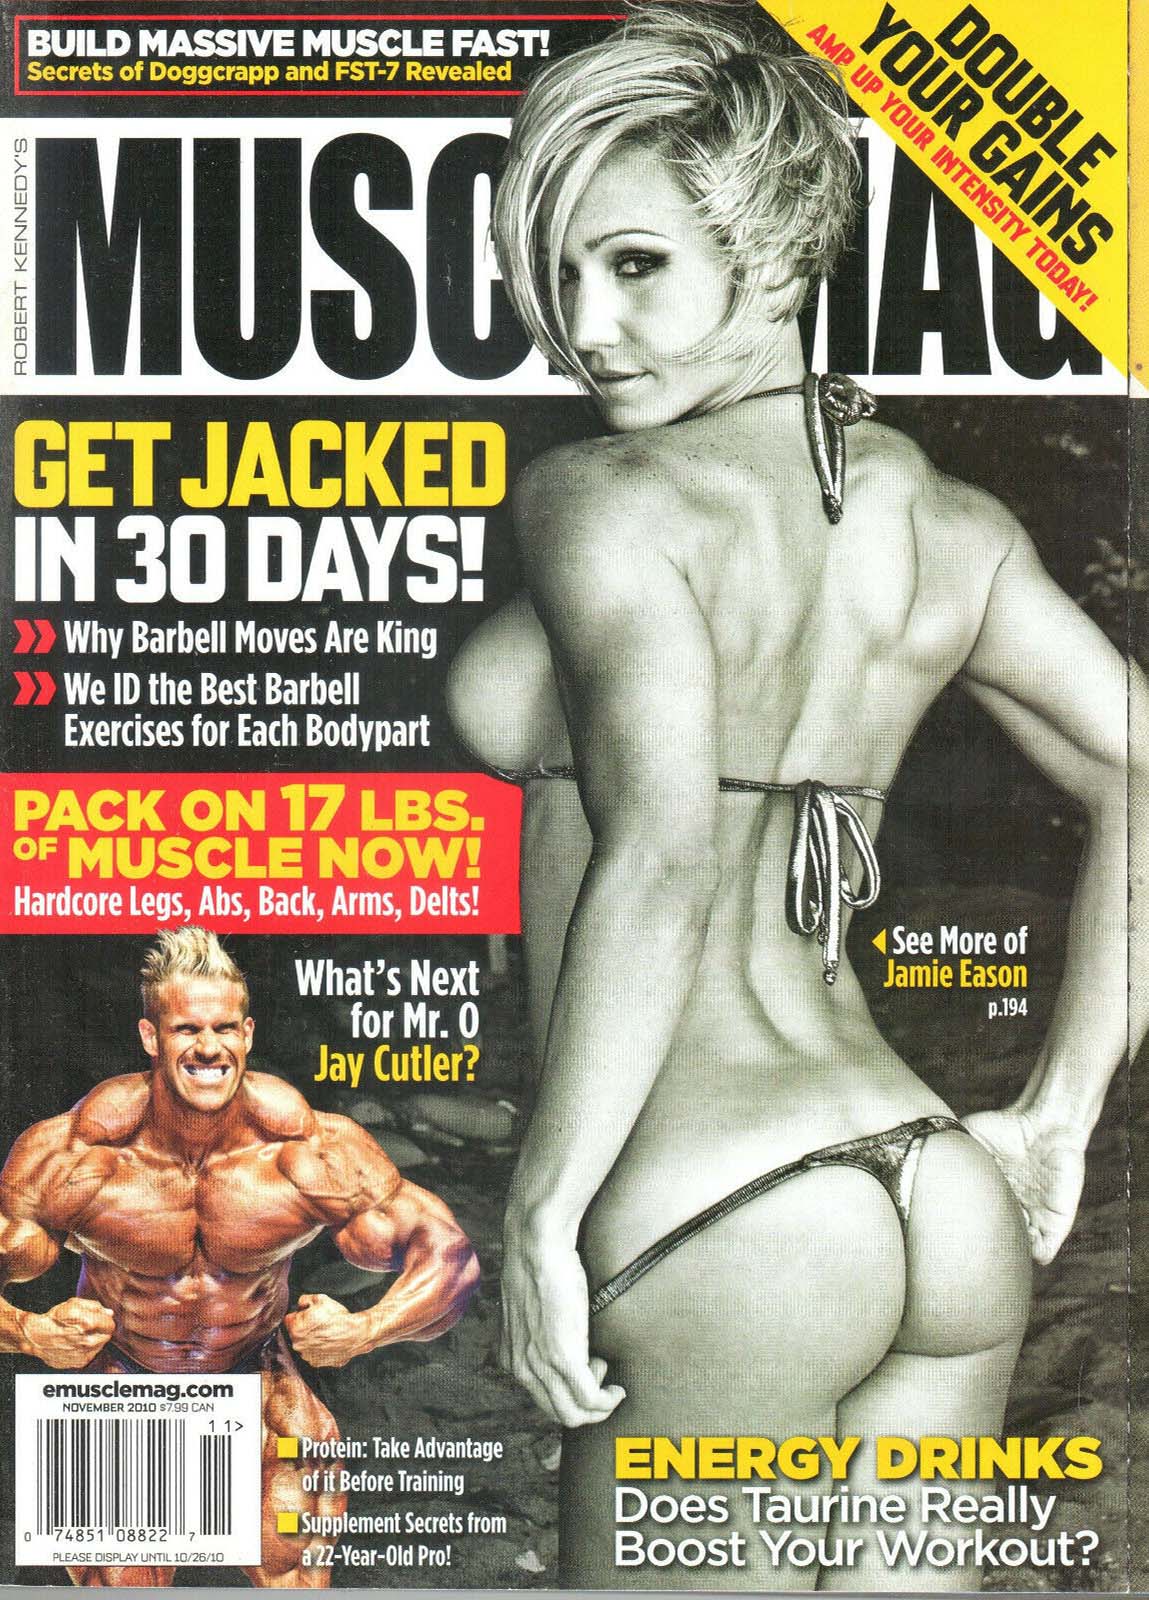 Muscle Mag November 2010 magazine back issue Muscle Mag magizine back copy Muscle Mag November 2010 Bodybuilding and Fitness Magazine Back Issue Published by Canadian Robert Kennedy and Founded in 1974. Build Massive Muscle Fast! Secrets Of Doggcrapp And FST-7 Revealed.